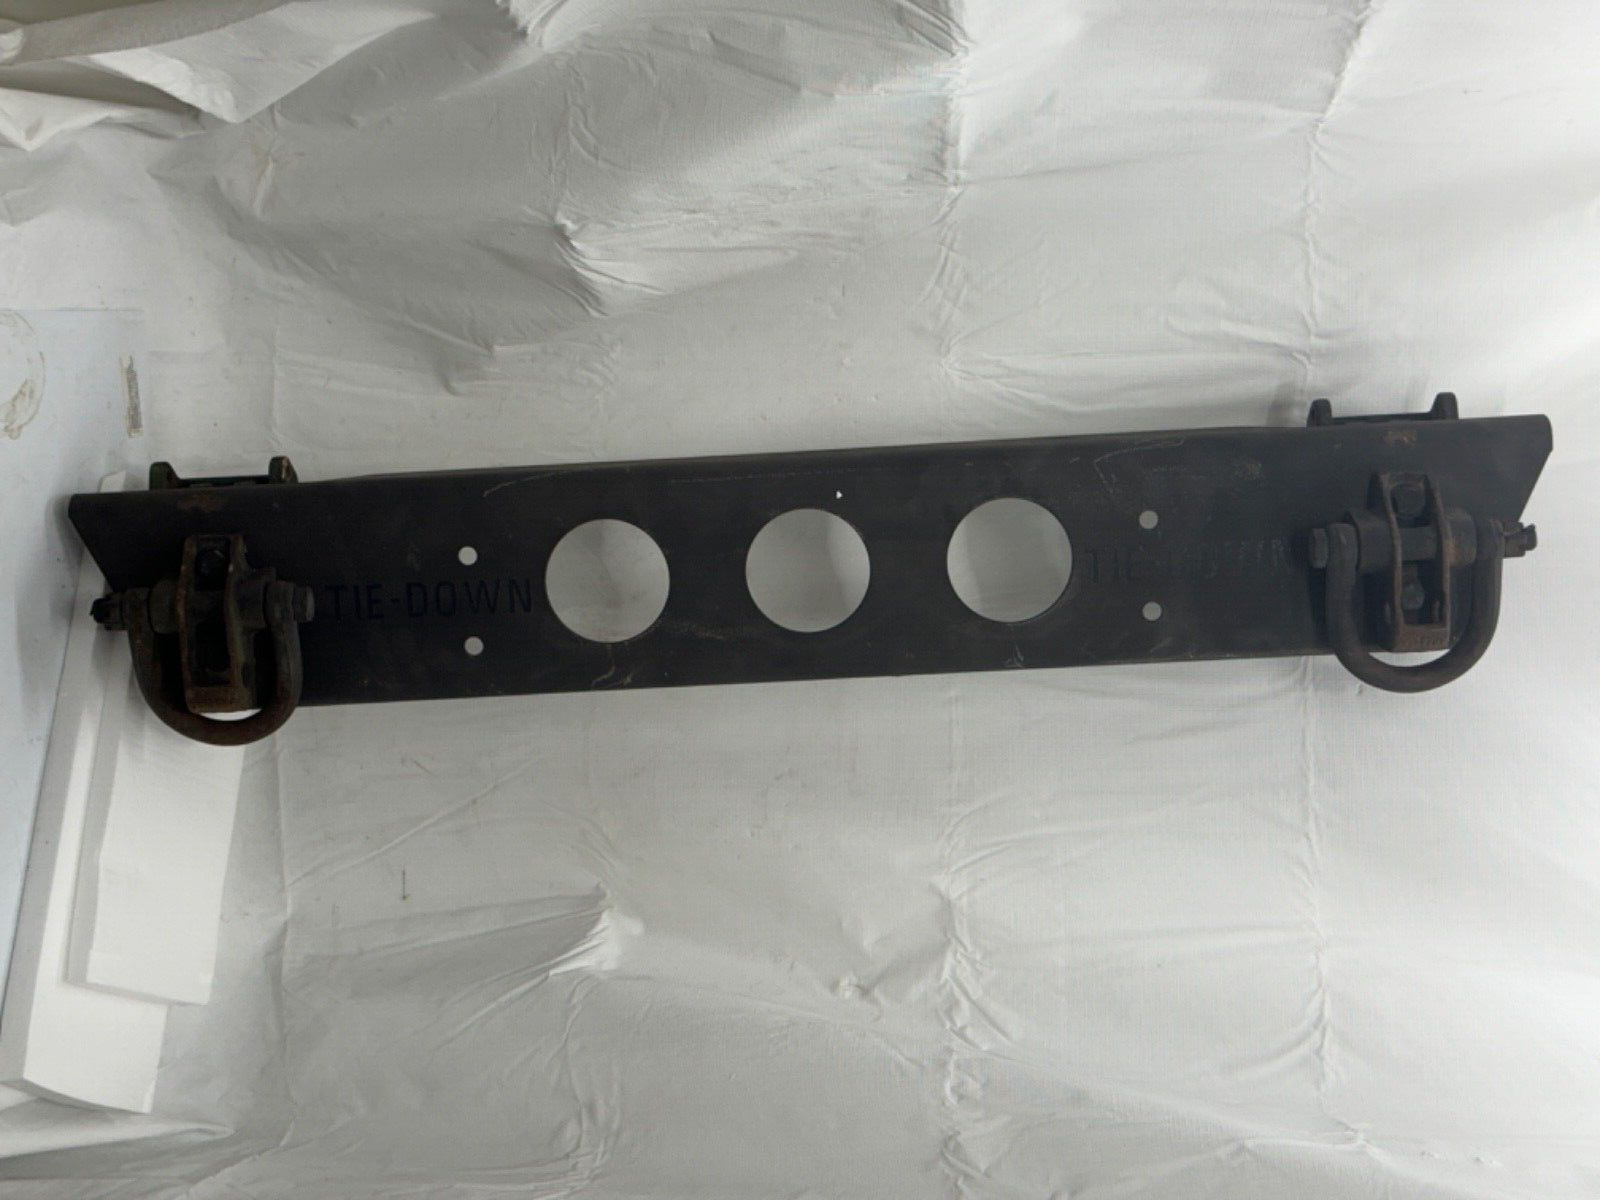 MILITARY HMMWV, HUMVEE Front Bumper W/Mount Brackets, Tow Shackles & Hardware